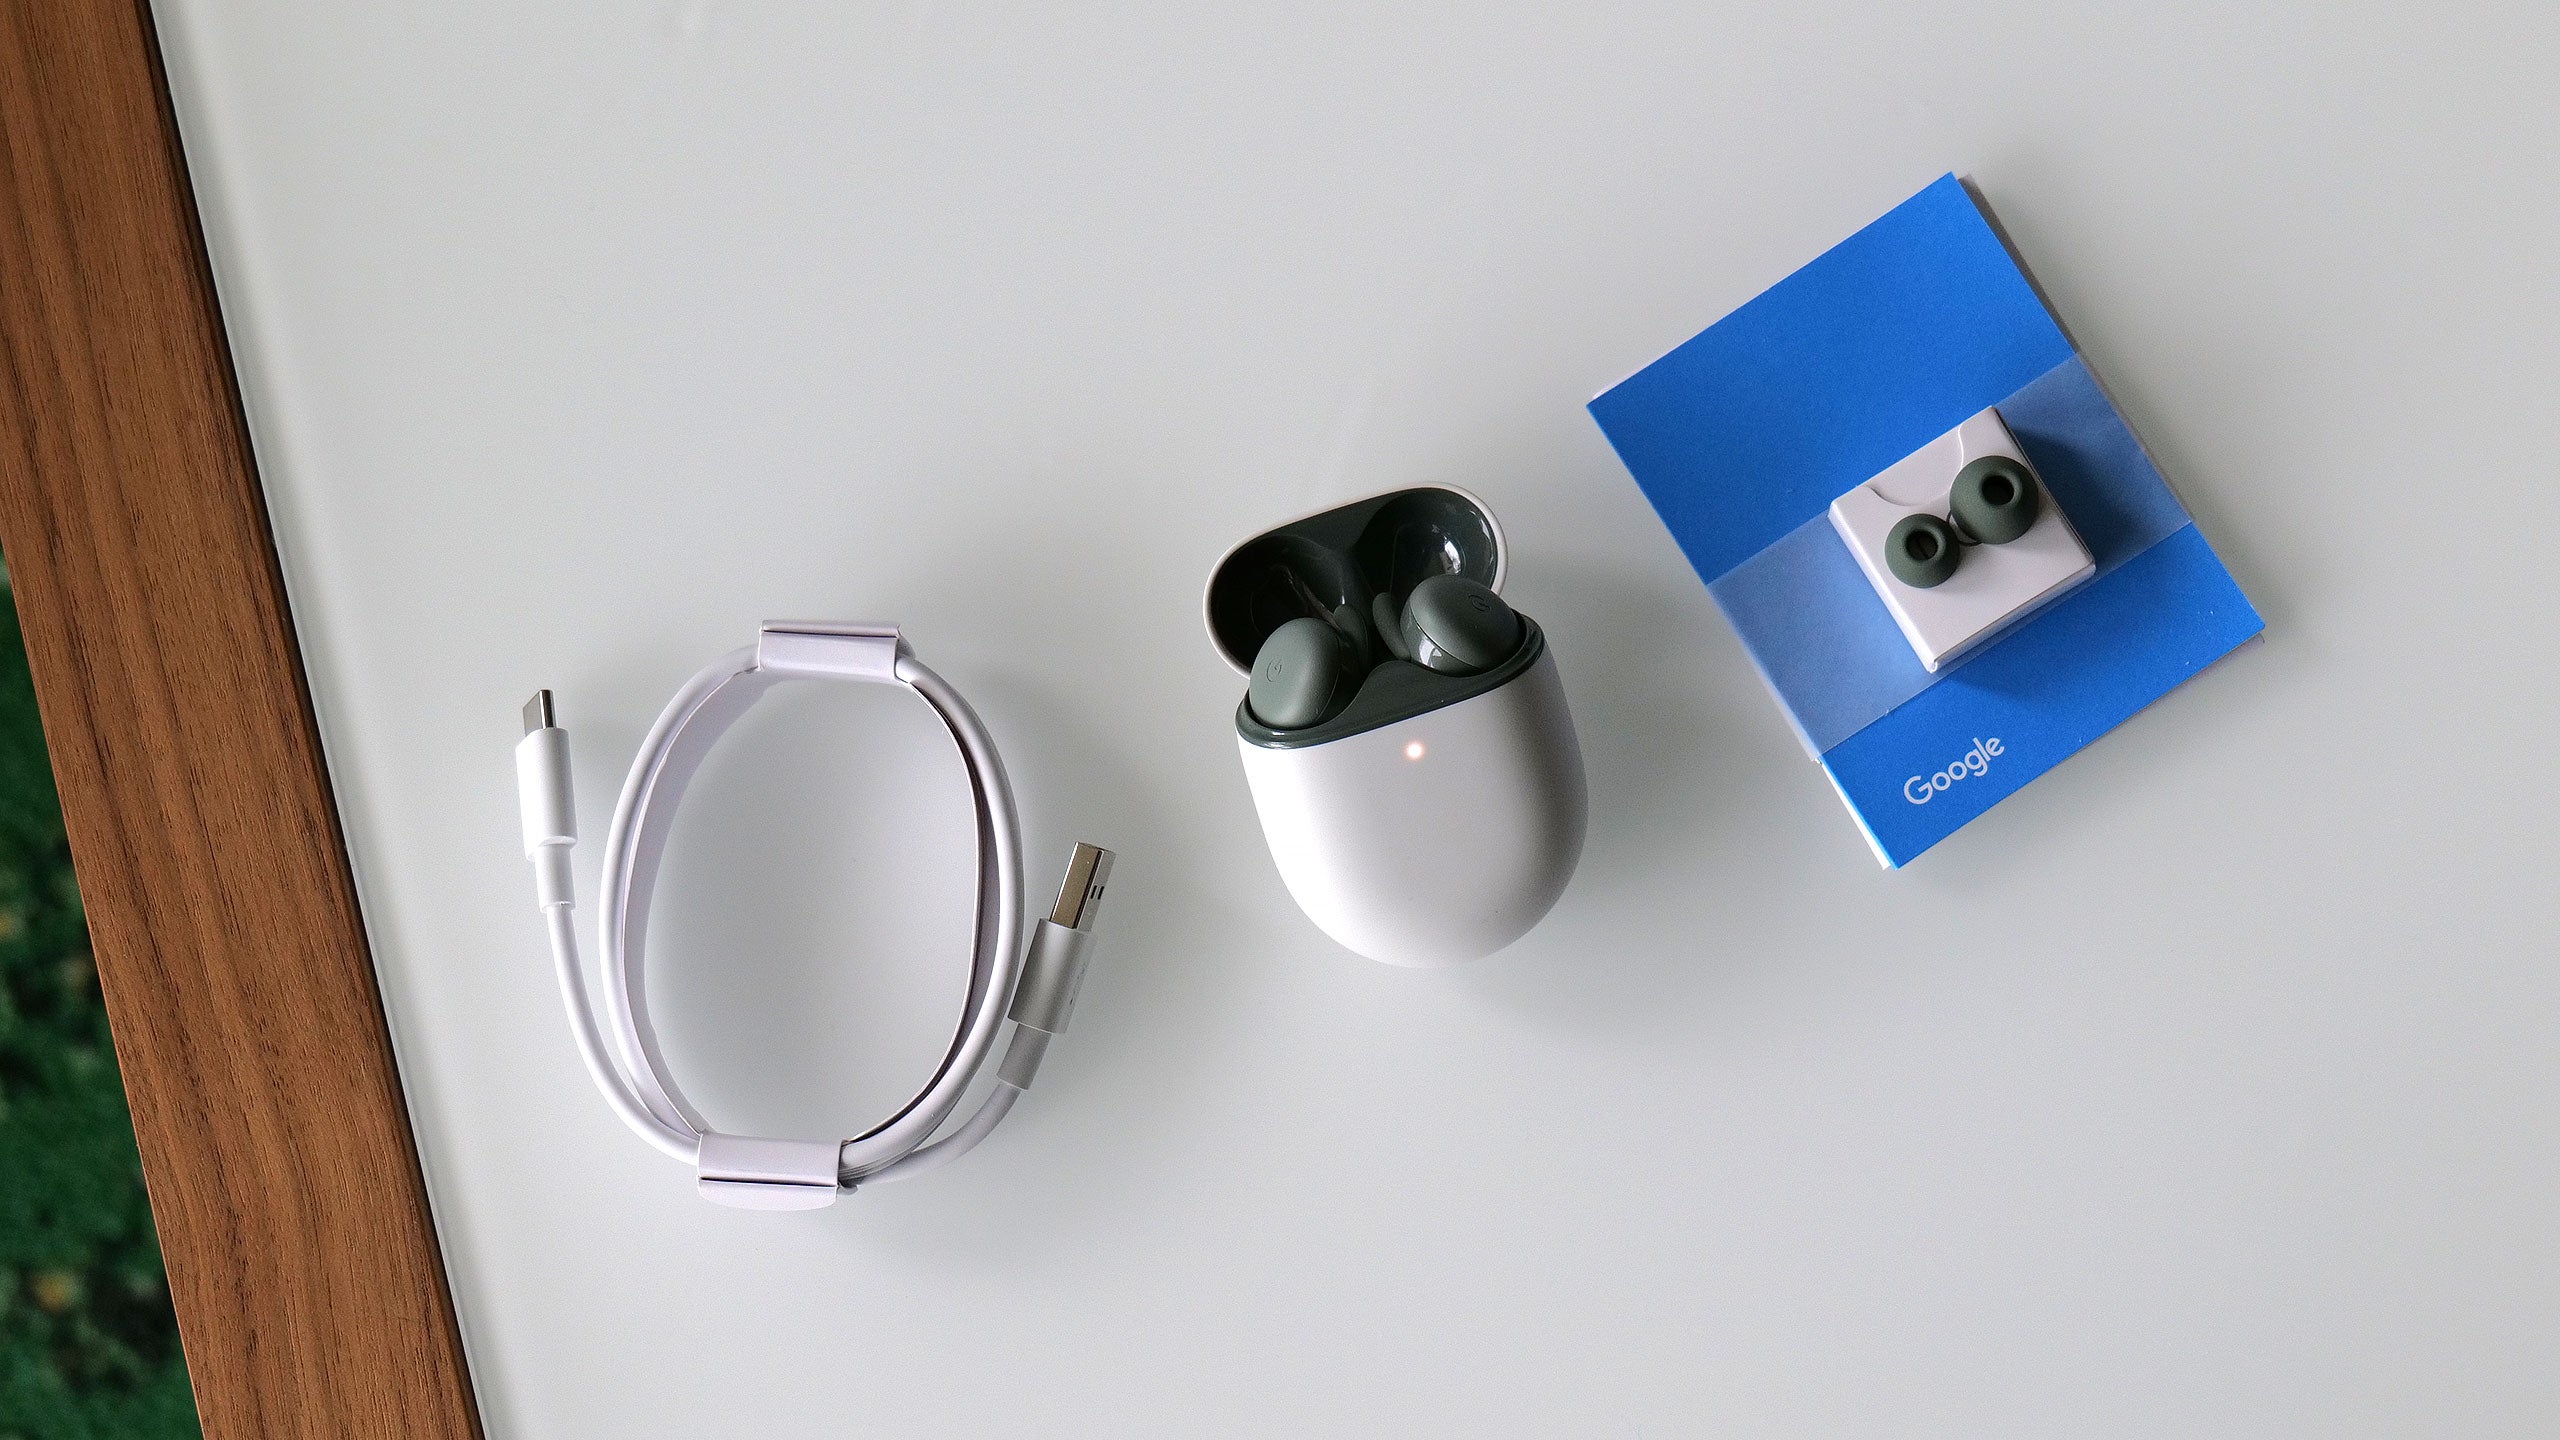 Here's everything that comes included with the Pixel Buds A.  (Photo: Sam Rutherford/Gizmodo)